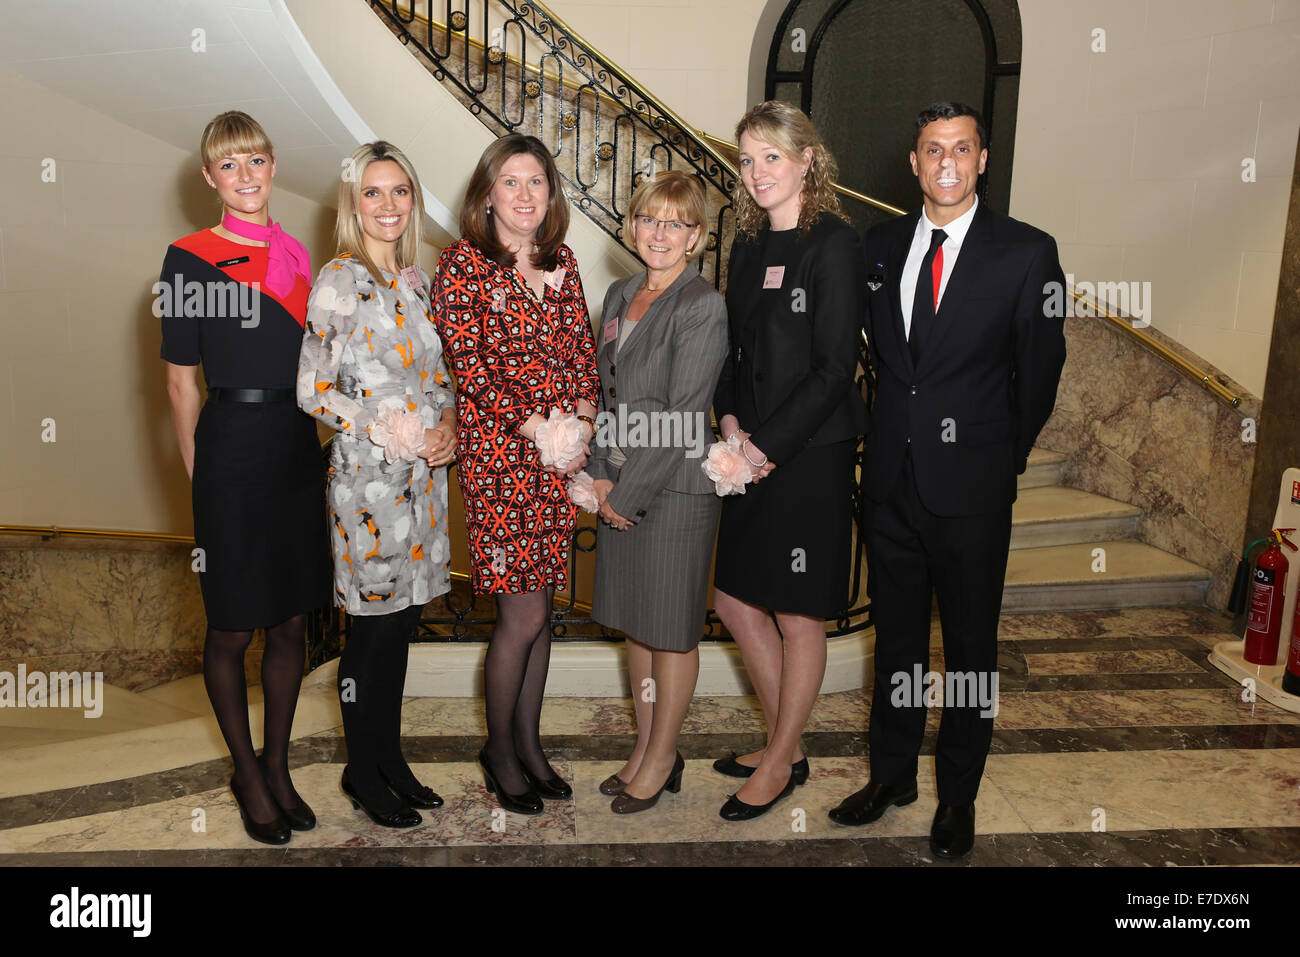 CSR Lawyer, Sarah Ramwell wins Qantas Australian Woman of the Year in the UK Award 2014 attended by The Hon. Julie Bishop MP, Minister for Foreign Affairs.  Featuring: Ashleigh Berry,Sarah Ramwell,Ann-Maree Morrison,Carole Berndt,Kelly O'Rourke,Ian Baylis Stock Photo